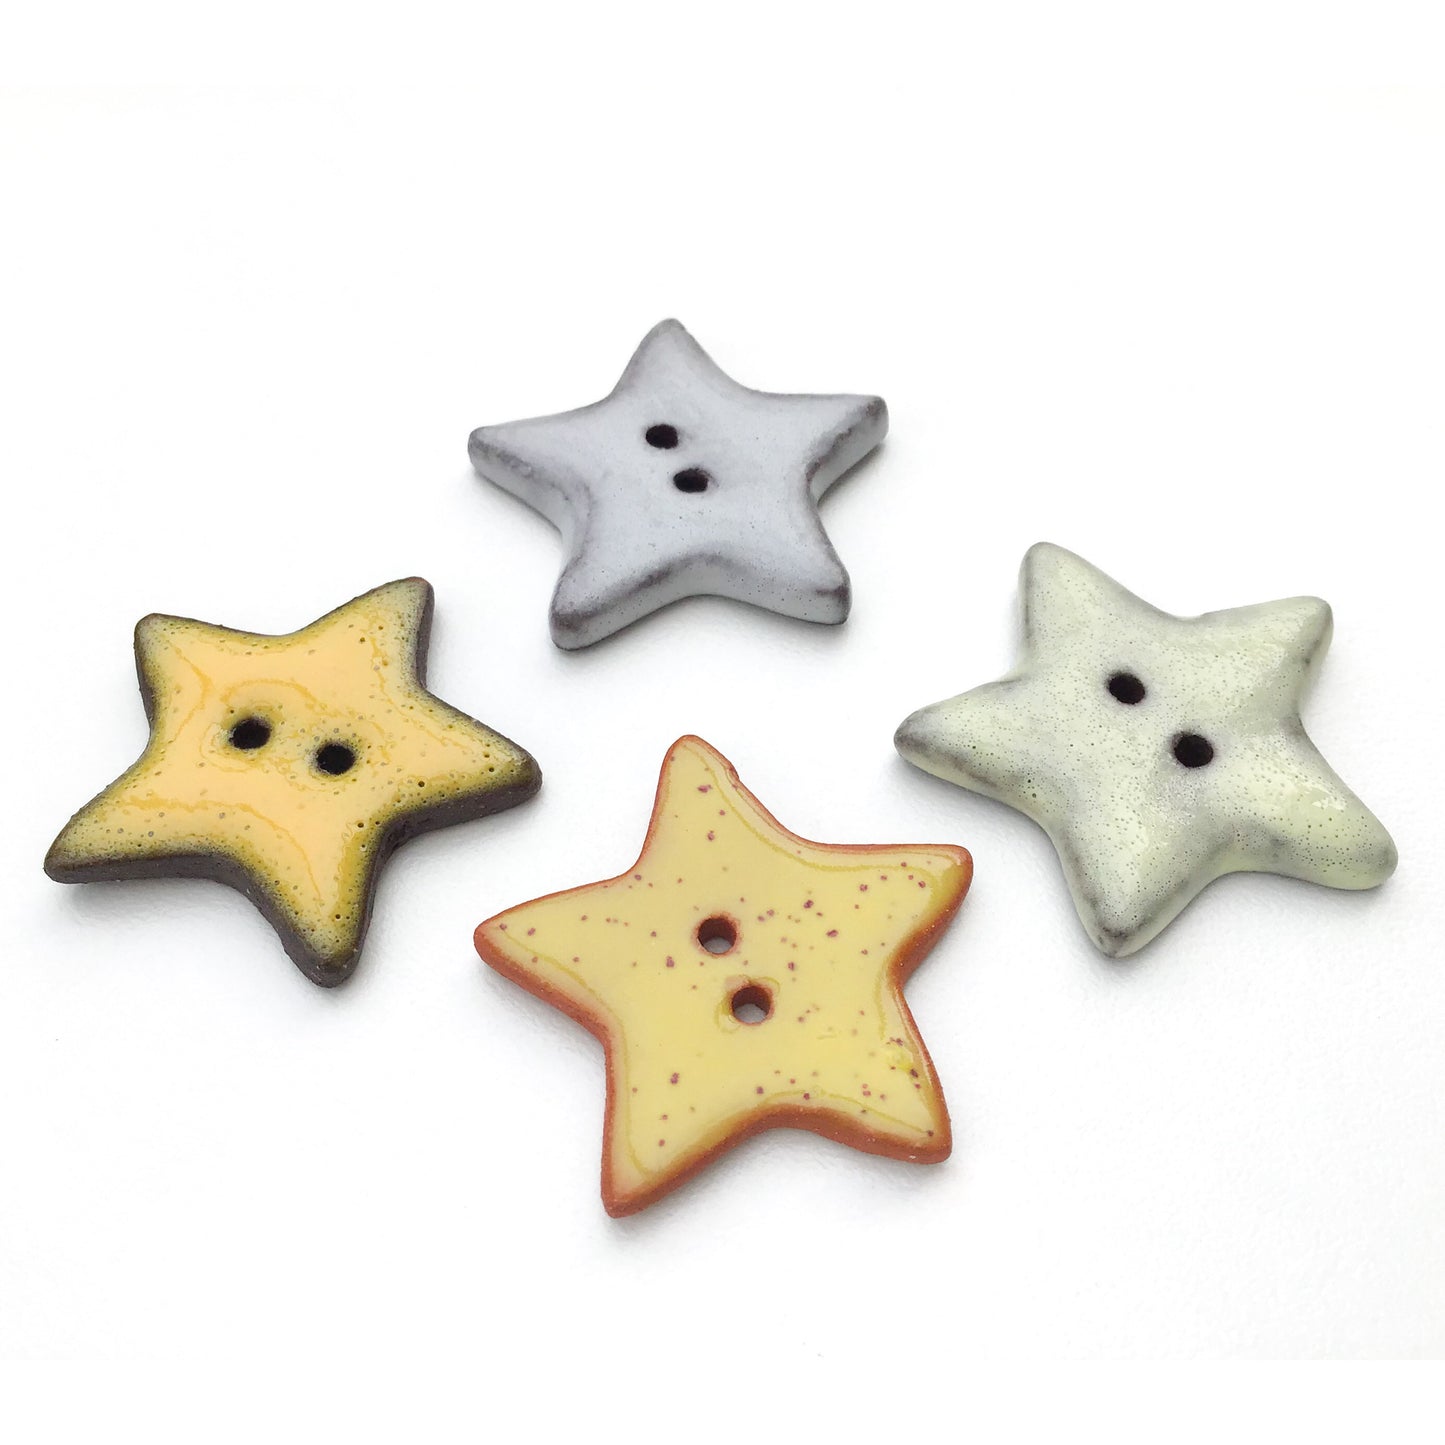 Stars Button Collection: Artisan Ceramic Buttons - Decorative Star Buttons (ws-240)